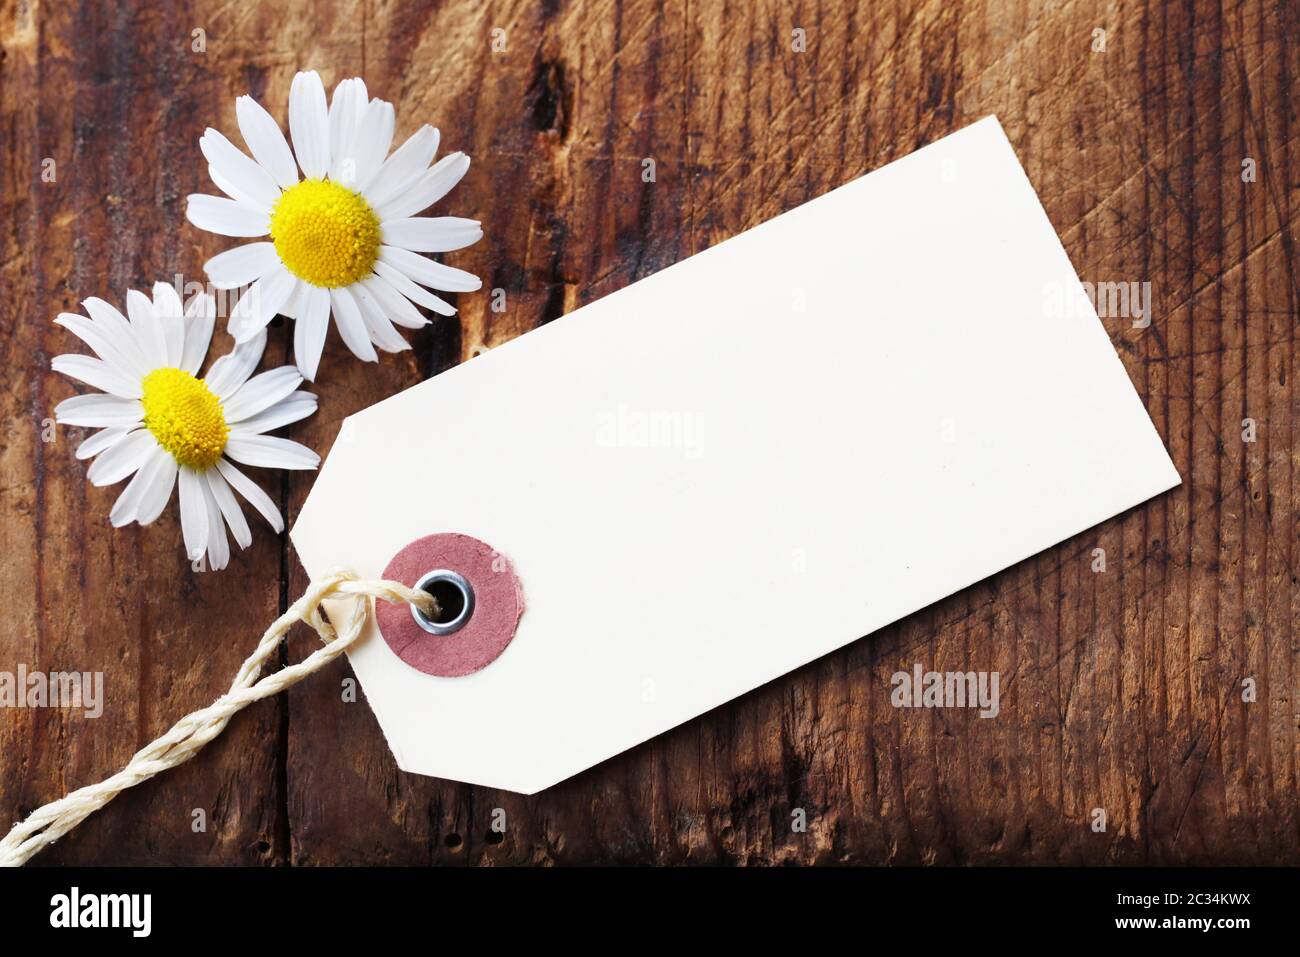 Blank Paper Label With Daisies On A Wooden Background Stock Photo